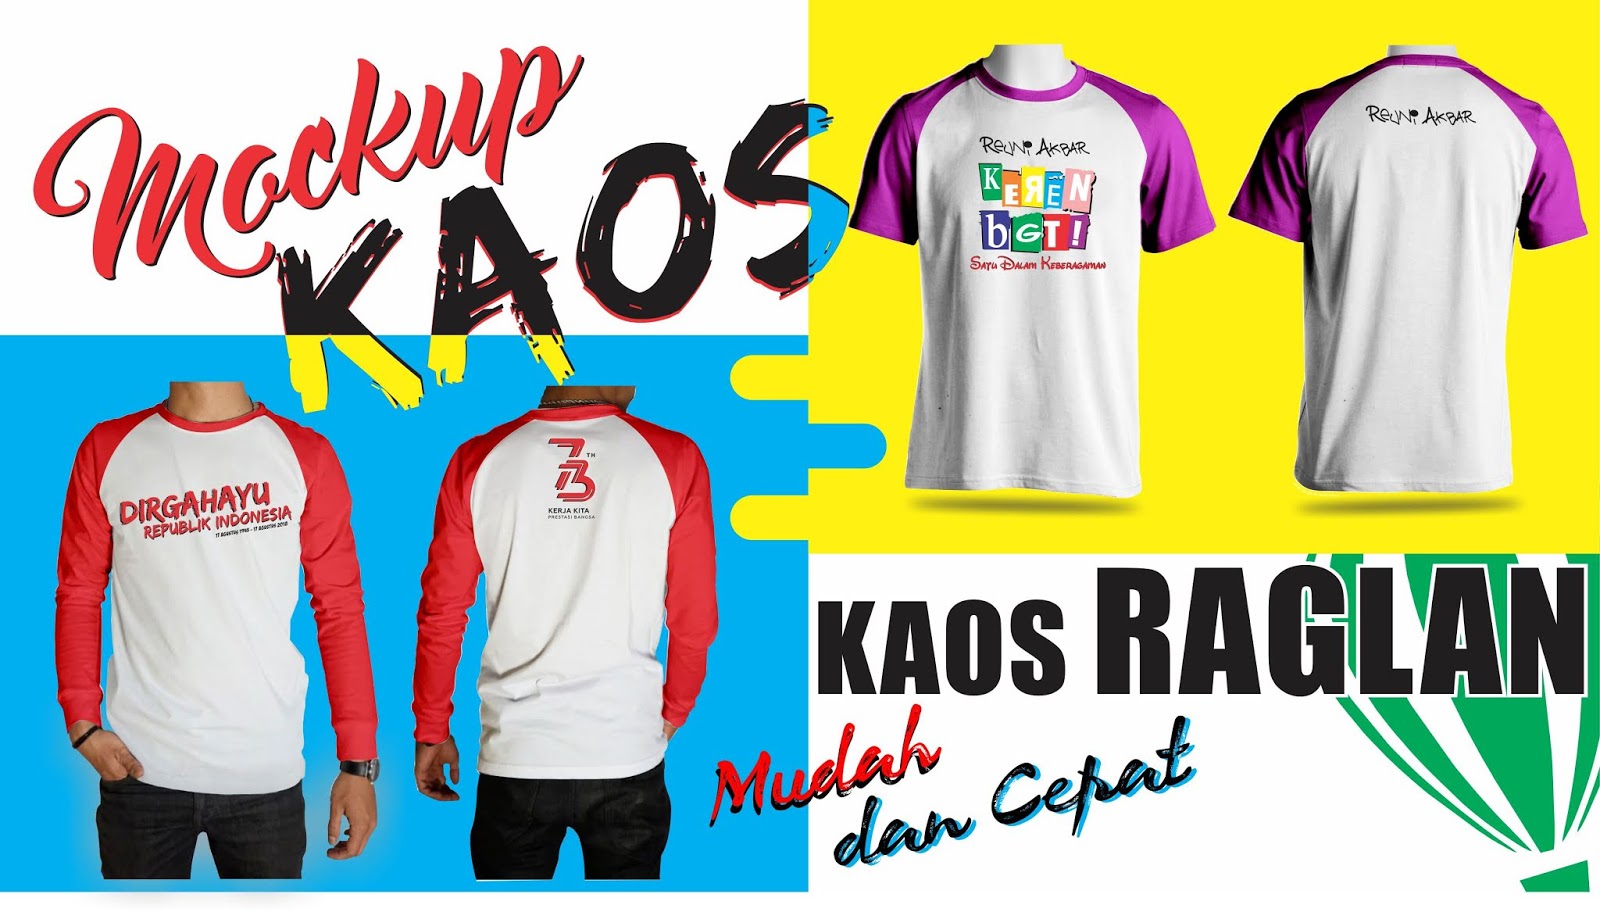 Download Mock Up Kaos Anak Cdr | Download Free and Premium Apparel PSD Mockup Templates and Design Assets